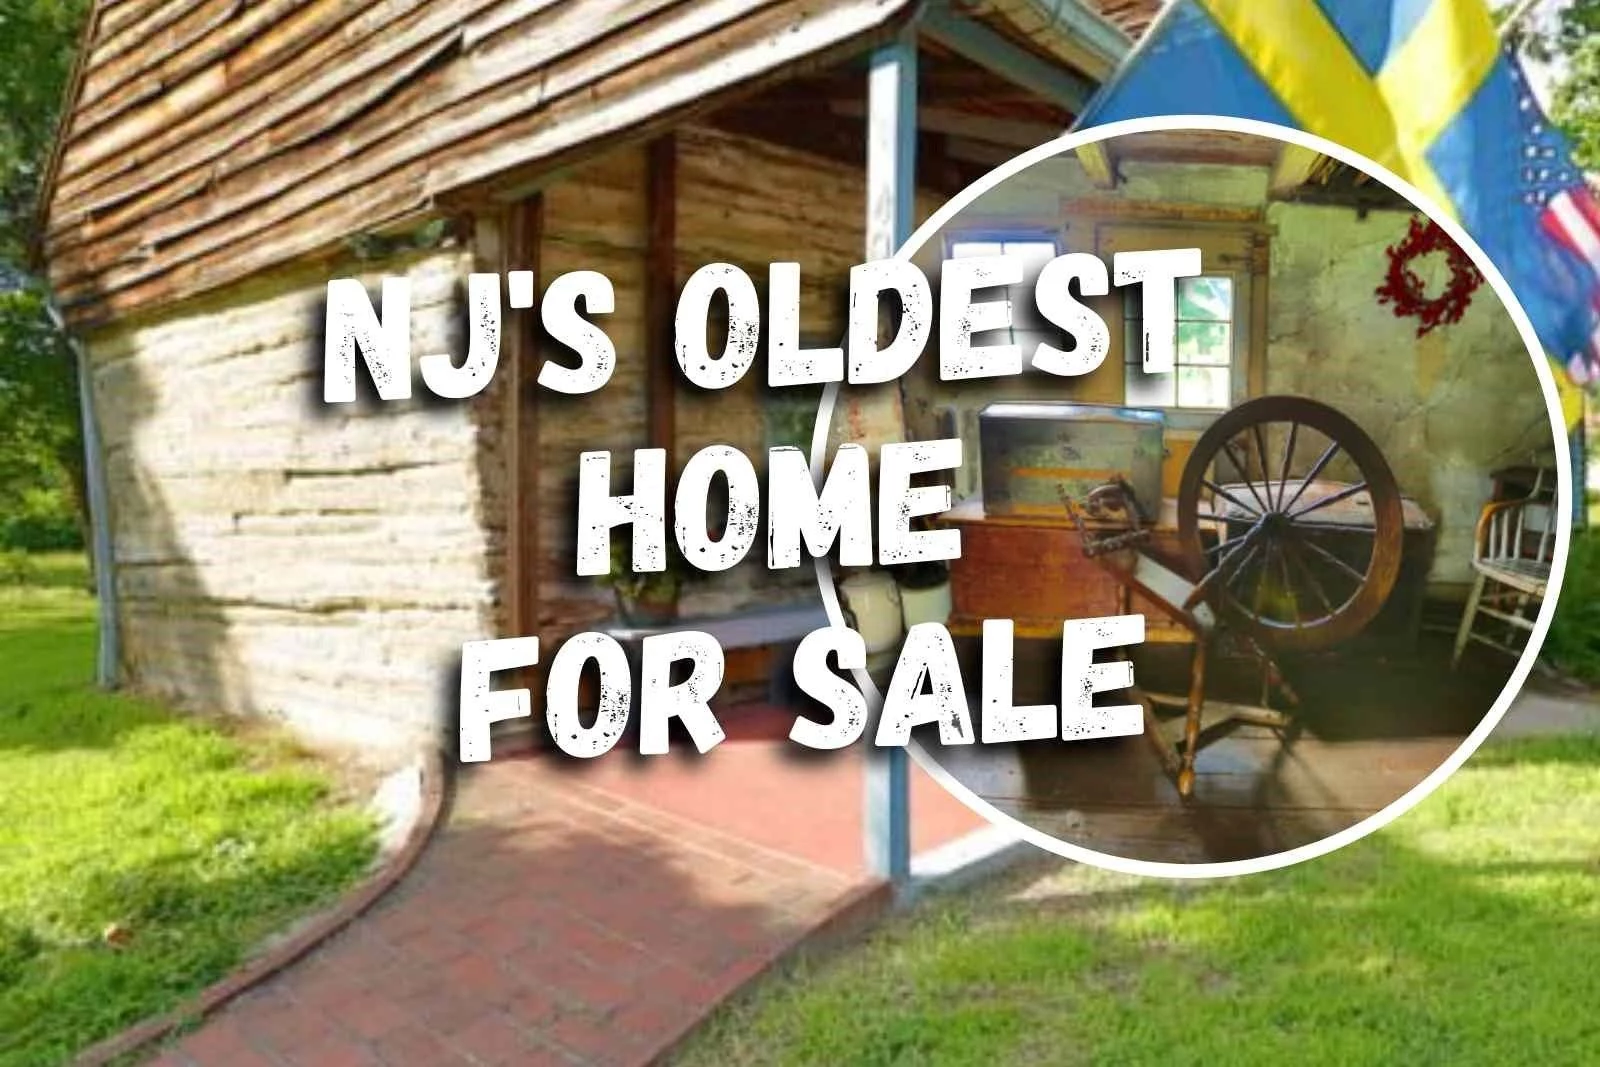 Look inside the oldest home for sale in NJ pic